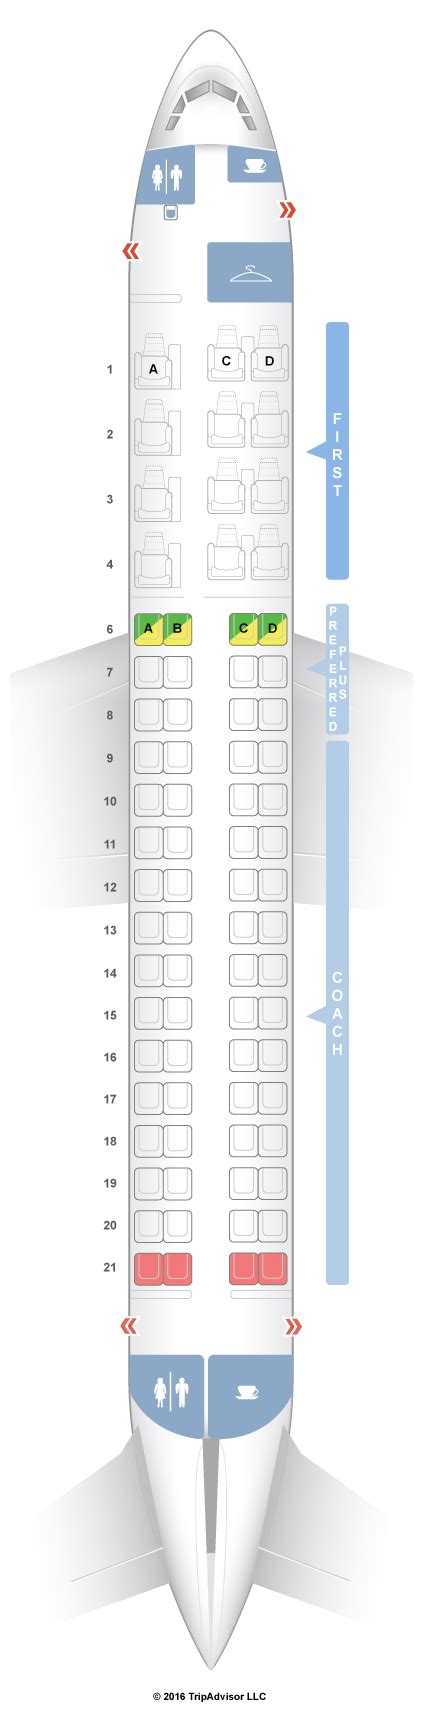 Embraer 175 Seat Map Alaska Two Birds Home